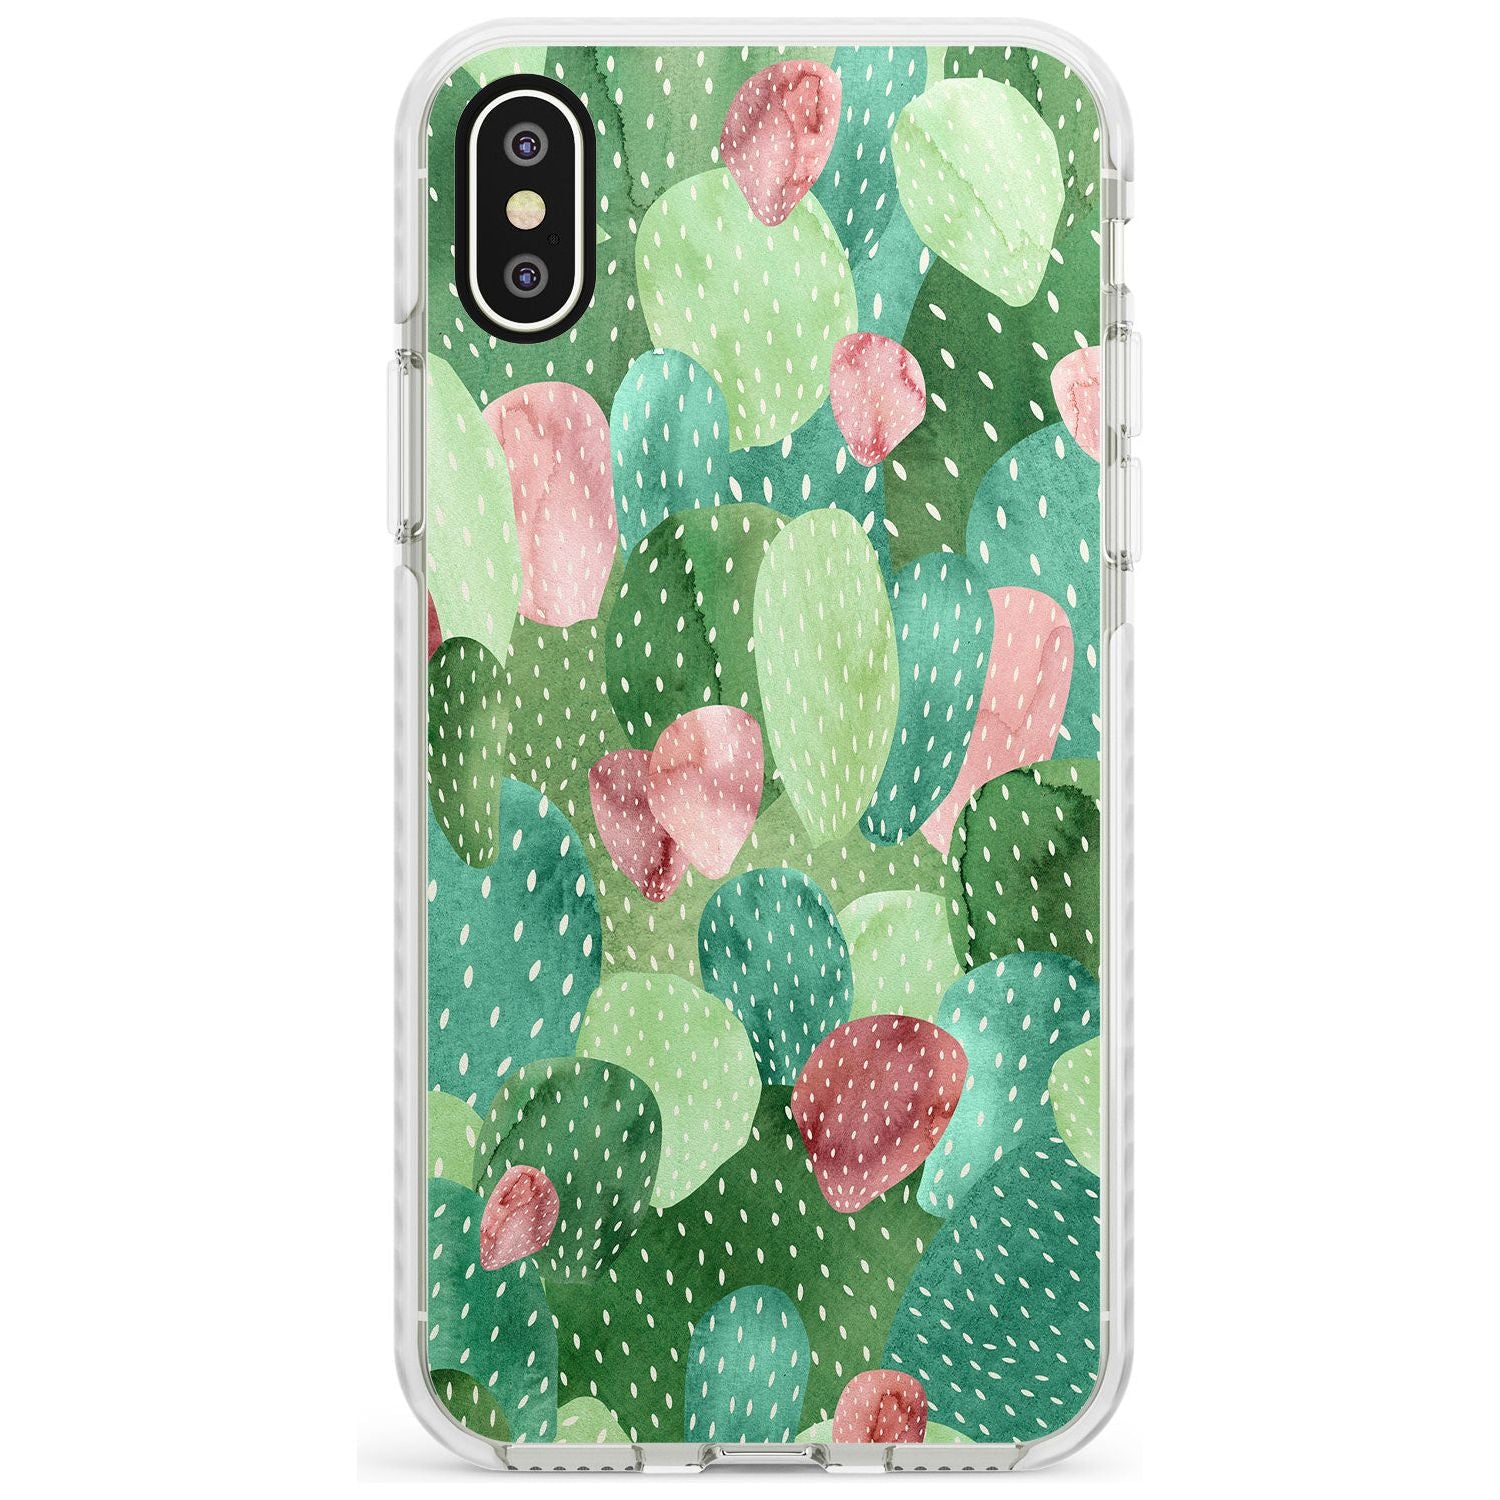 Colourful Cactus Mix Design Impact Phone Case for iPhone X XS Max XR